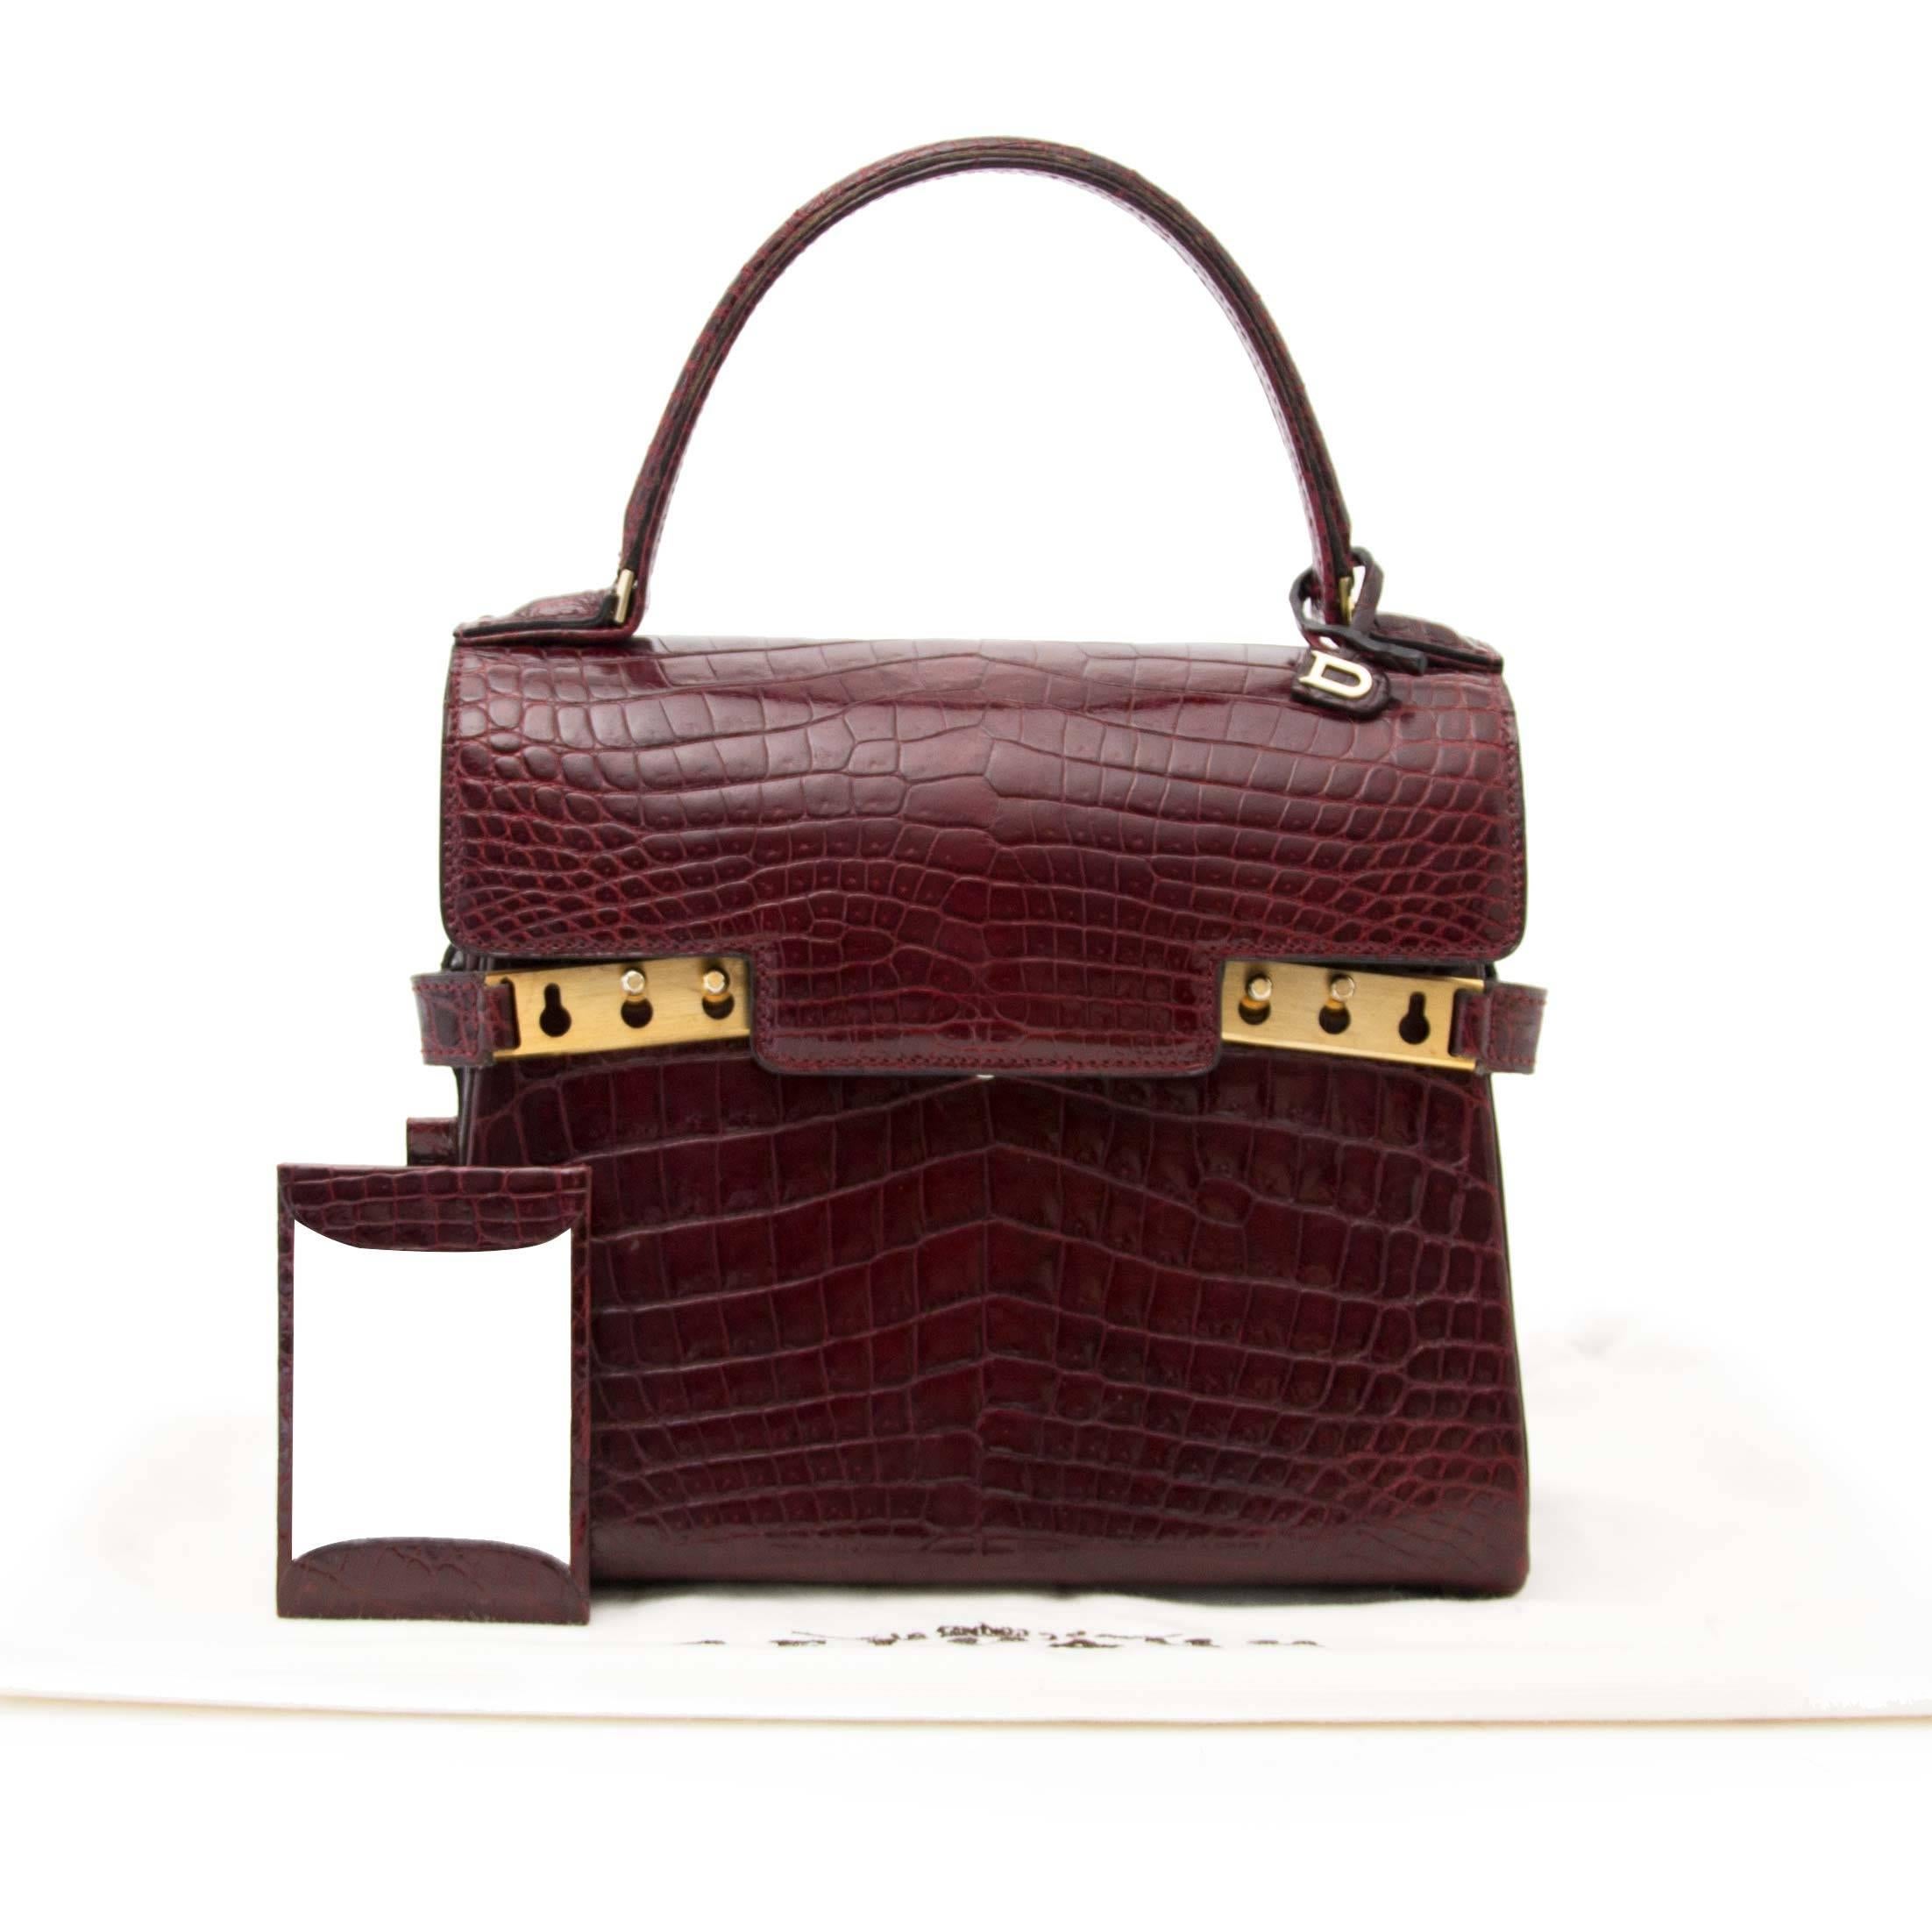 Introducing you to this refined design by Belgian house Delvaux: the Tempête is a true icon on its own, and this beautiful Delvaux Tempête PM is the epitome of luxury.
Its divine croco leather comes in a stunning dark brownish hue, which catches the